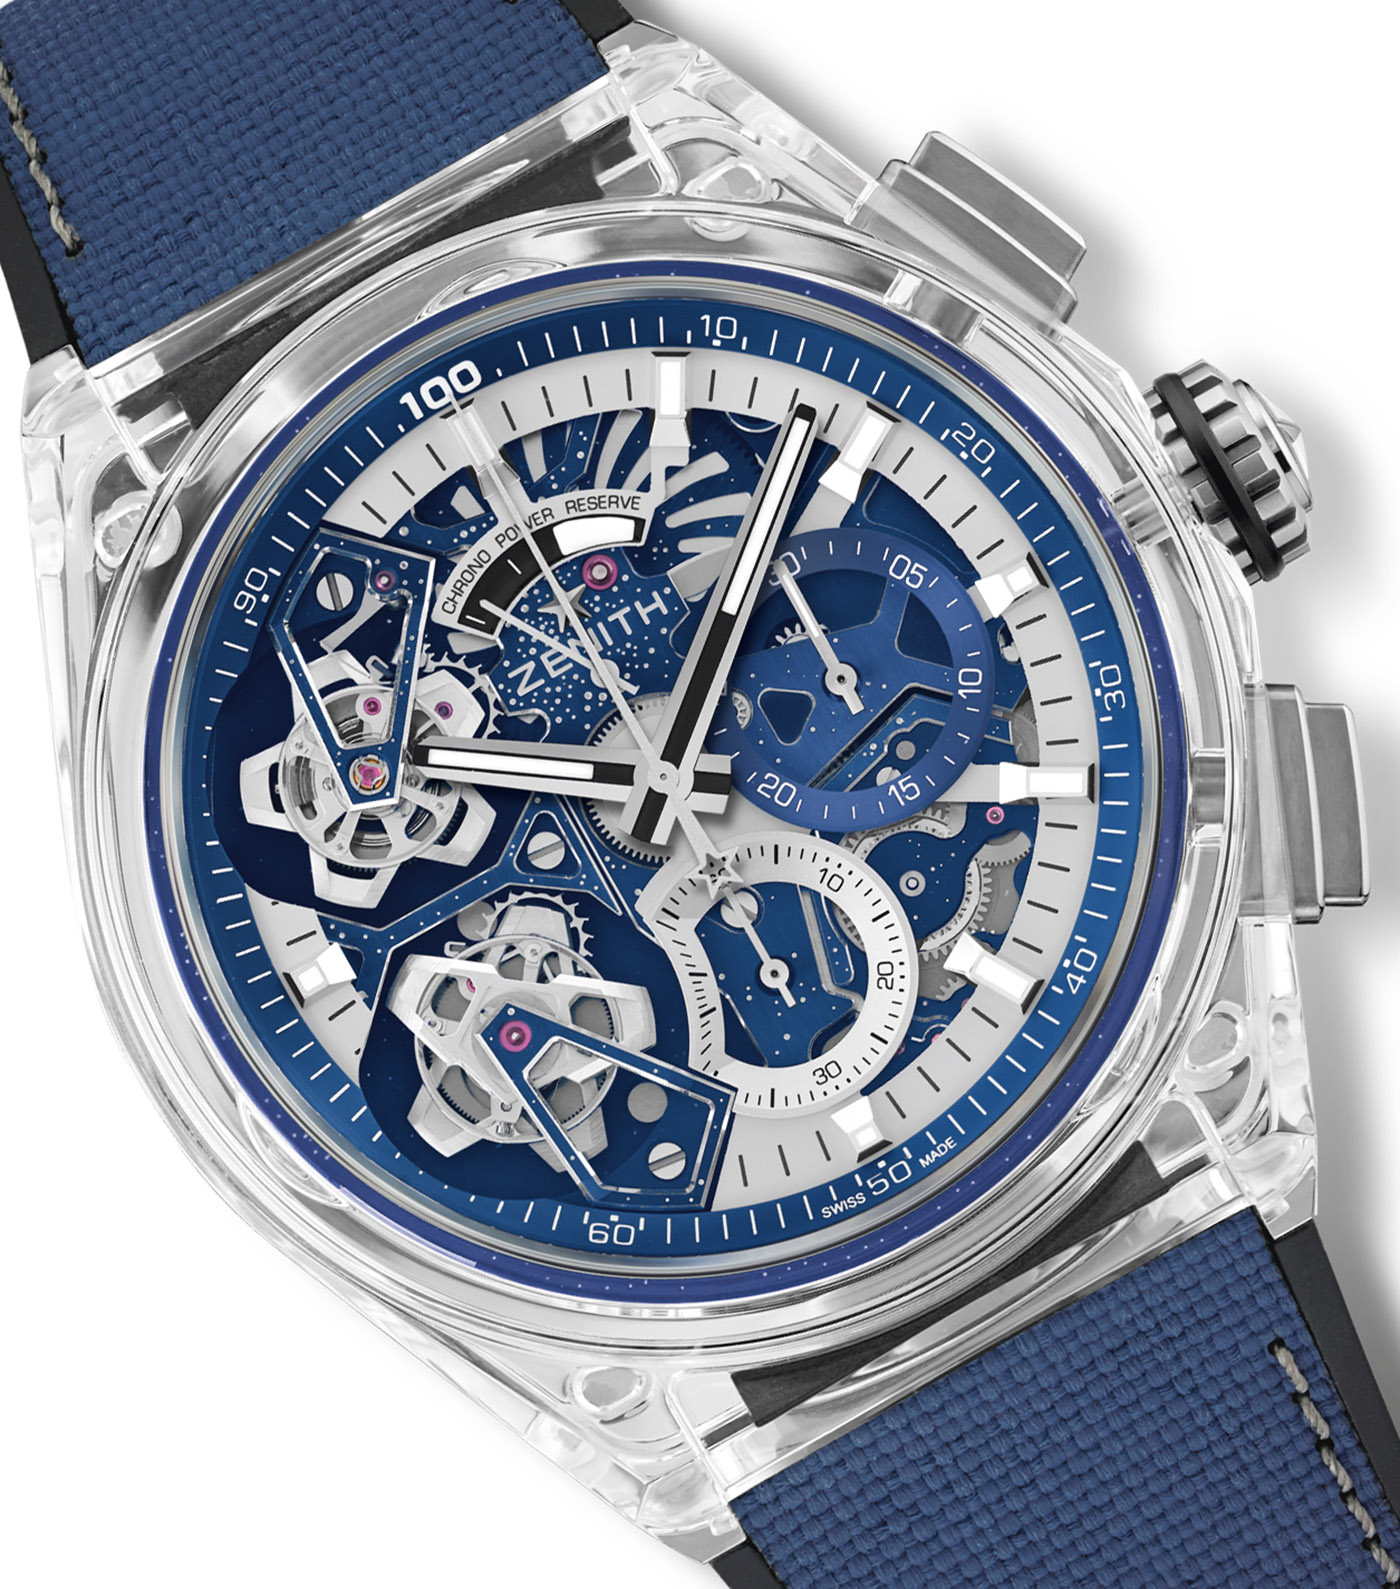 ZENITH UNVEILS DEFY SKYLINE SAPPHIRE AT NEWLY OPENED CYPRUS